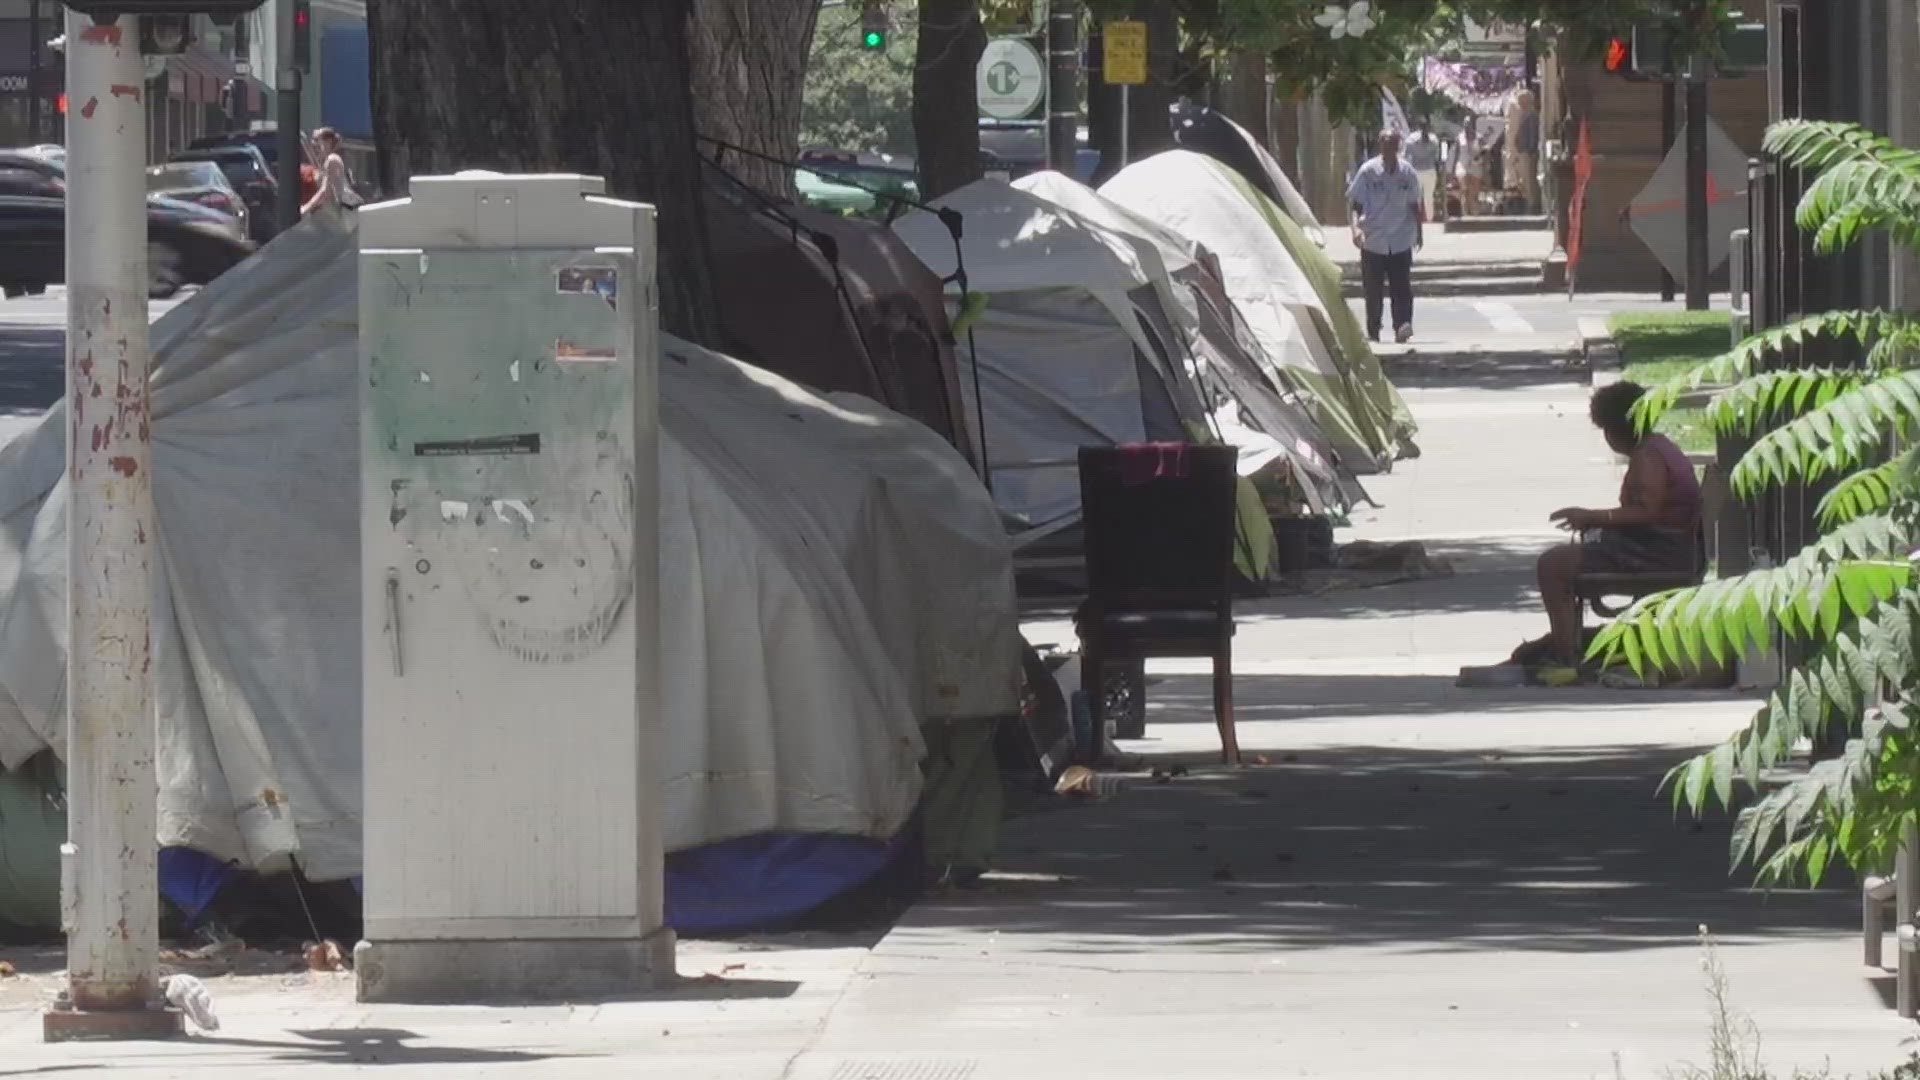 Sacramento Homeless Union expresses concern over removing unhoused from the courthouse